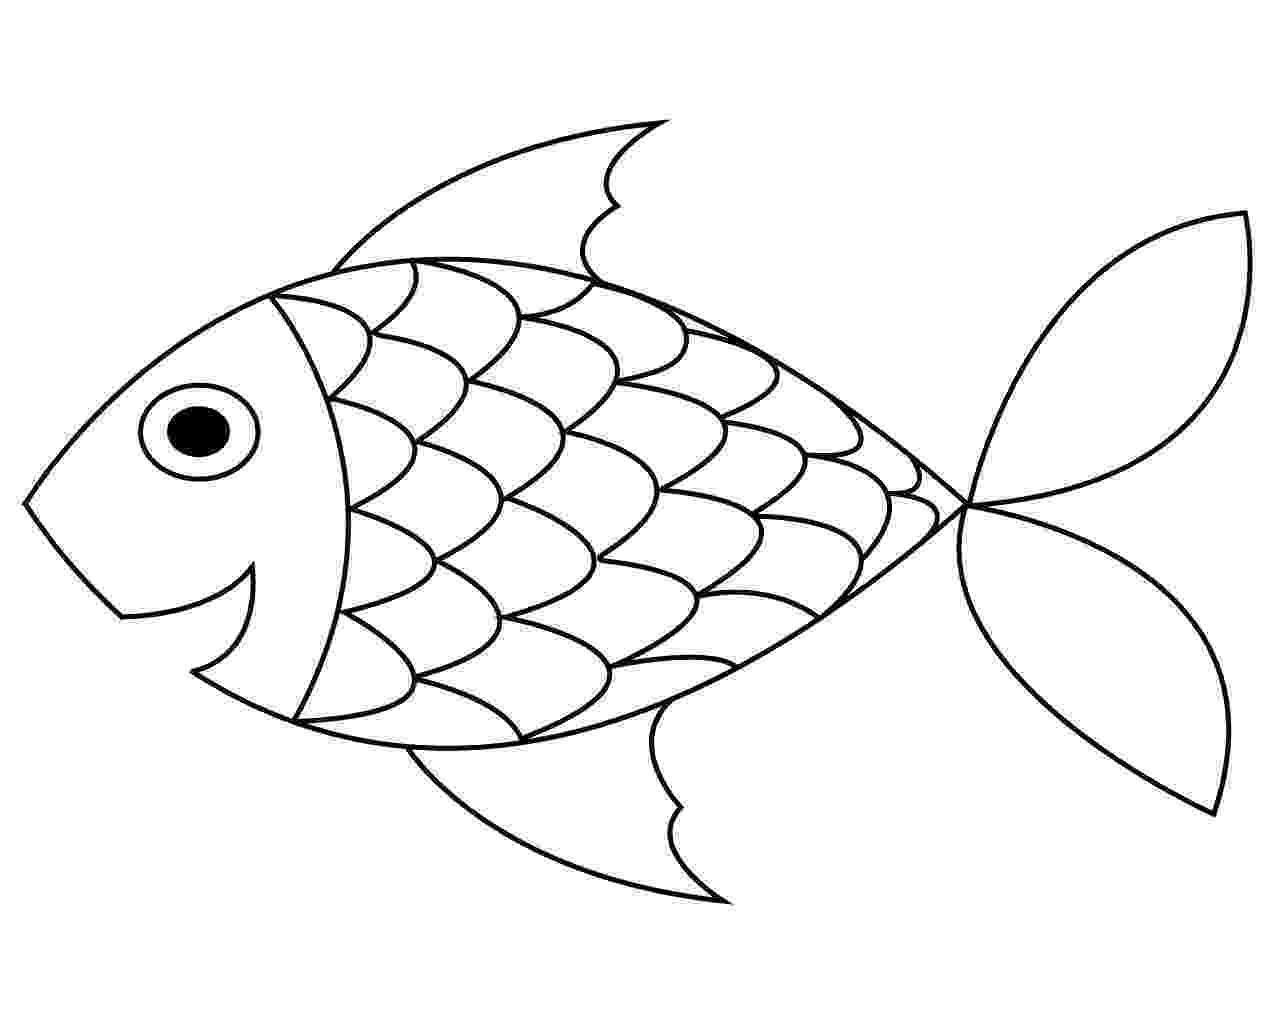 picture of fish to color print download cute and educative fish coloring pages to color fish picture of 